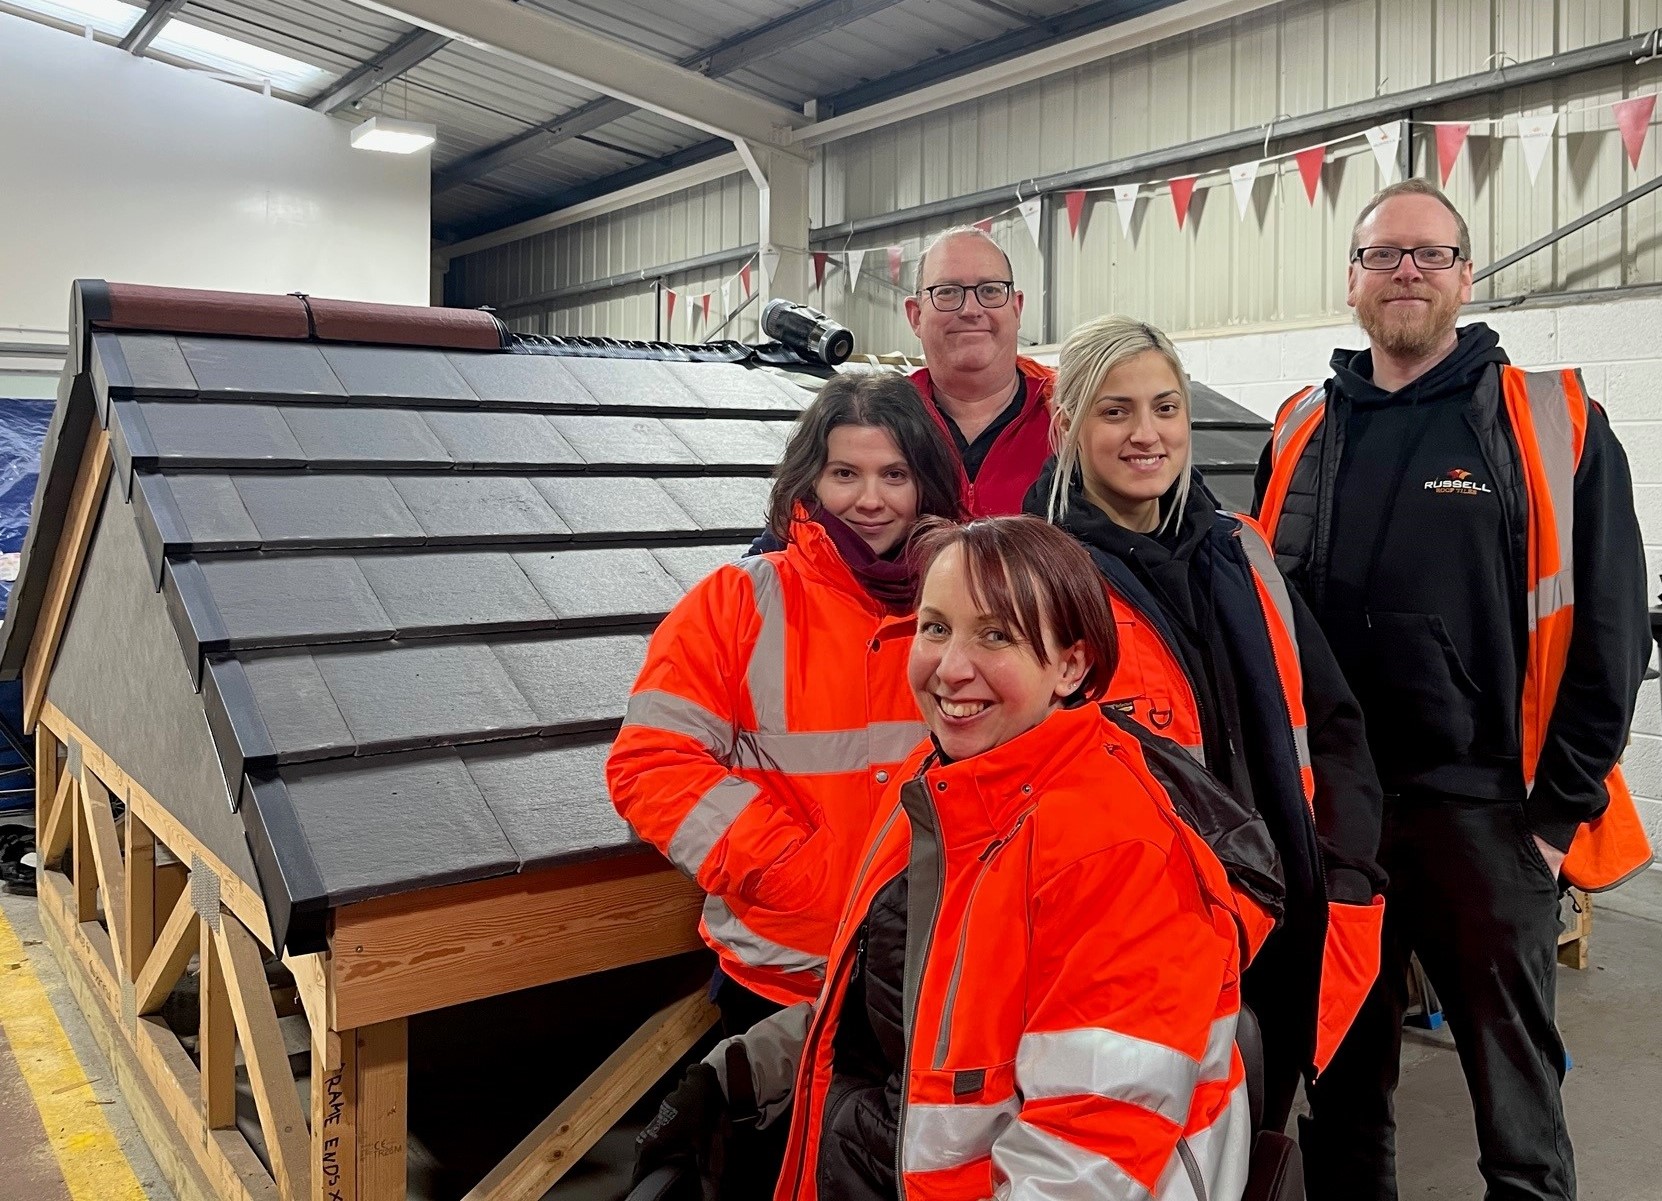 Russell Roof Tiles supports women in manufacturing and construction